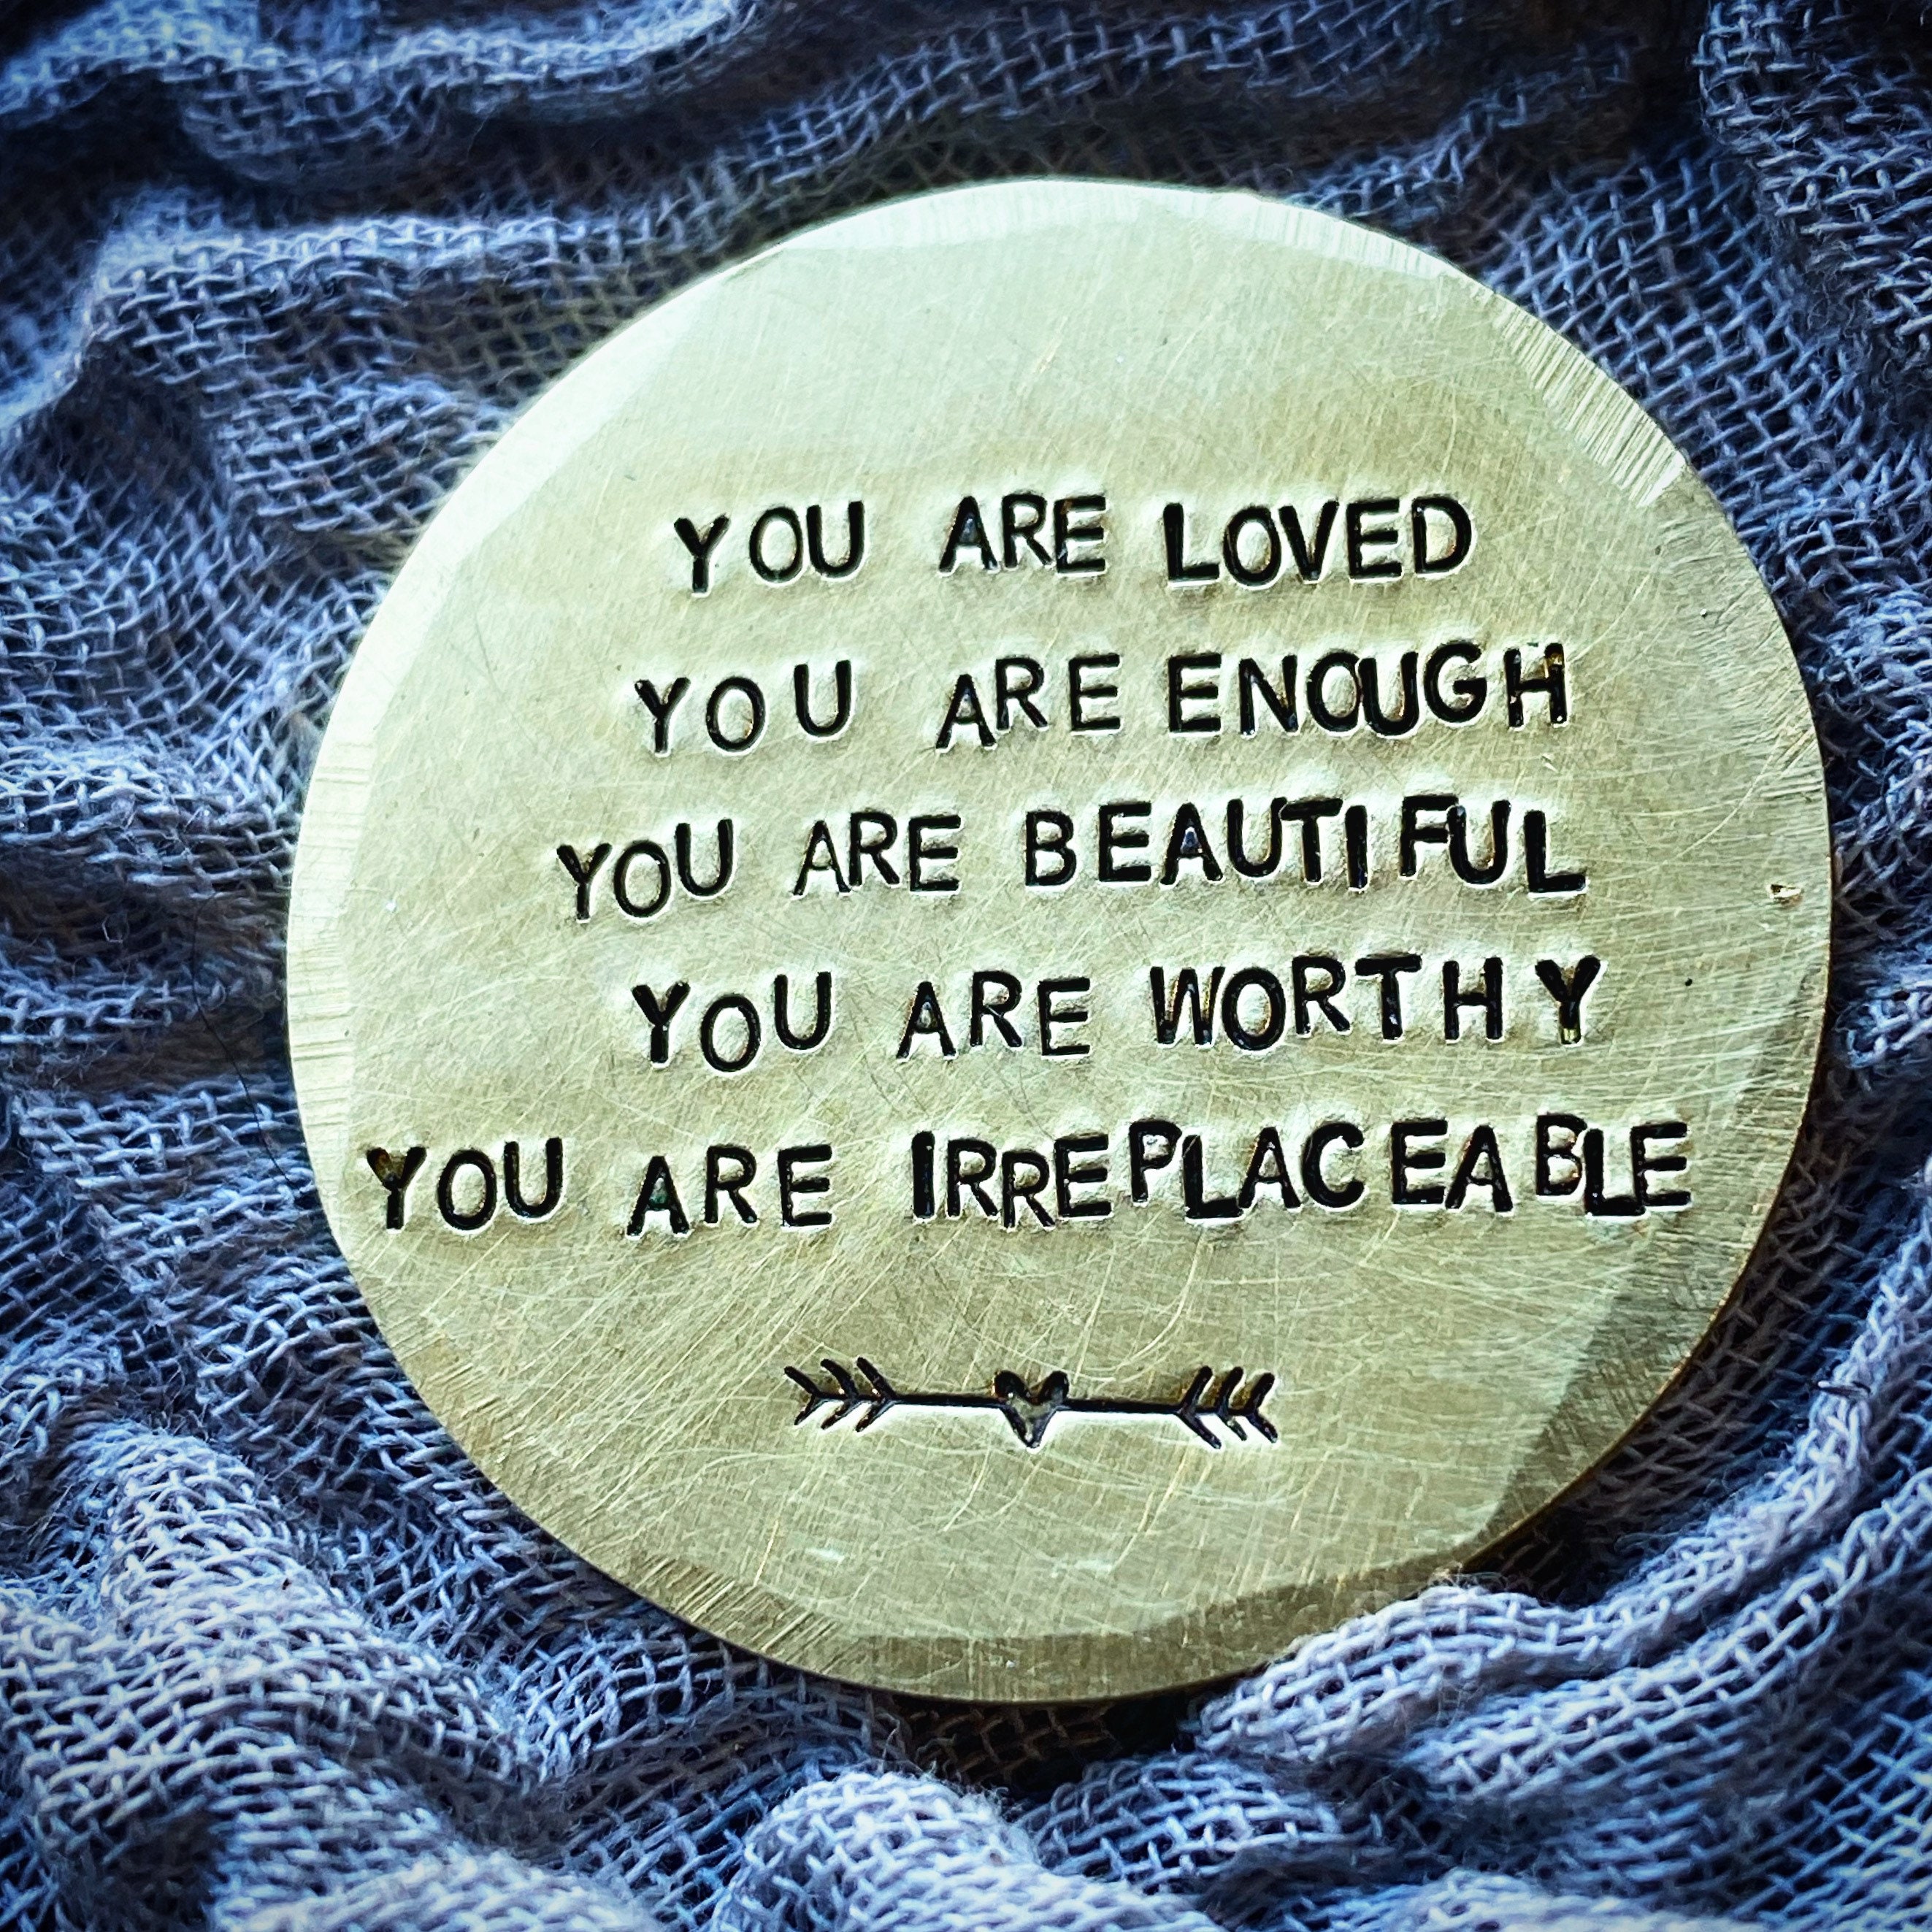 Dayspring You Are Enough - Inspirational Keychain